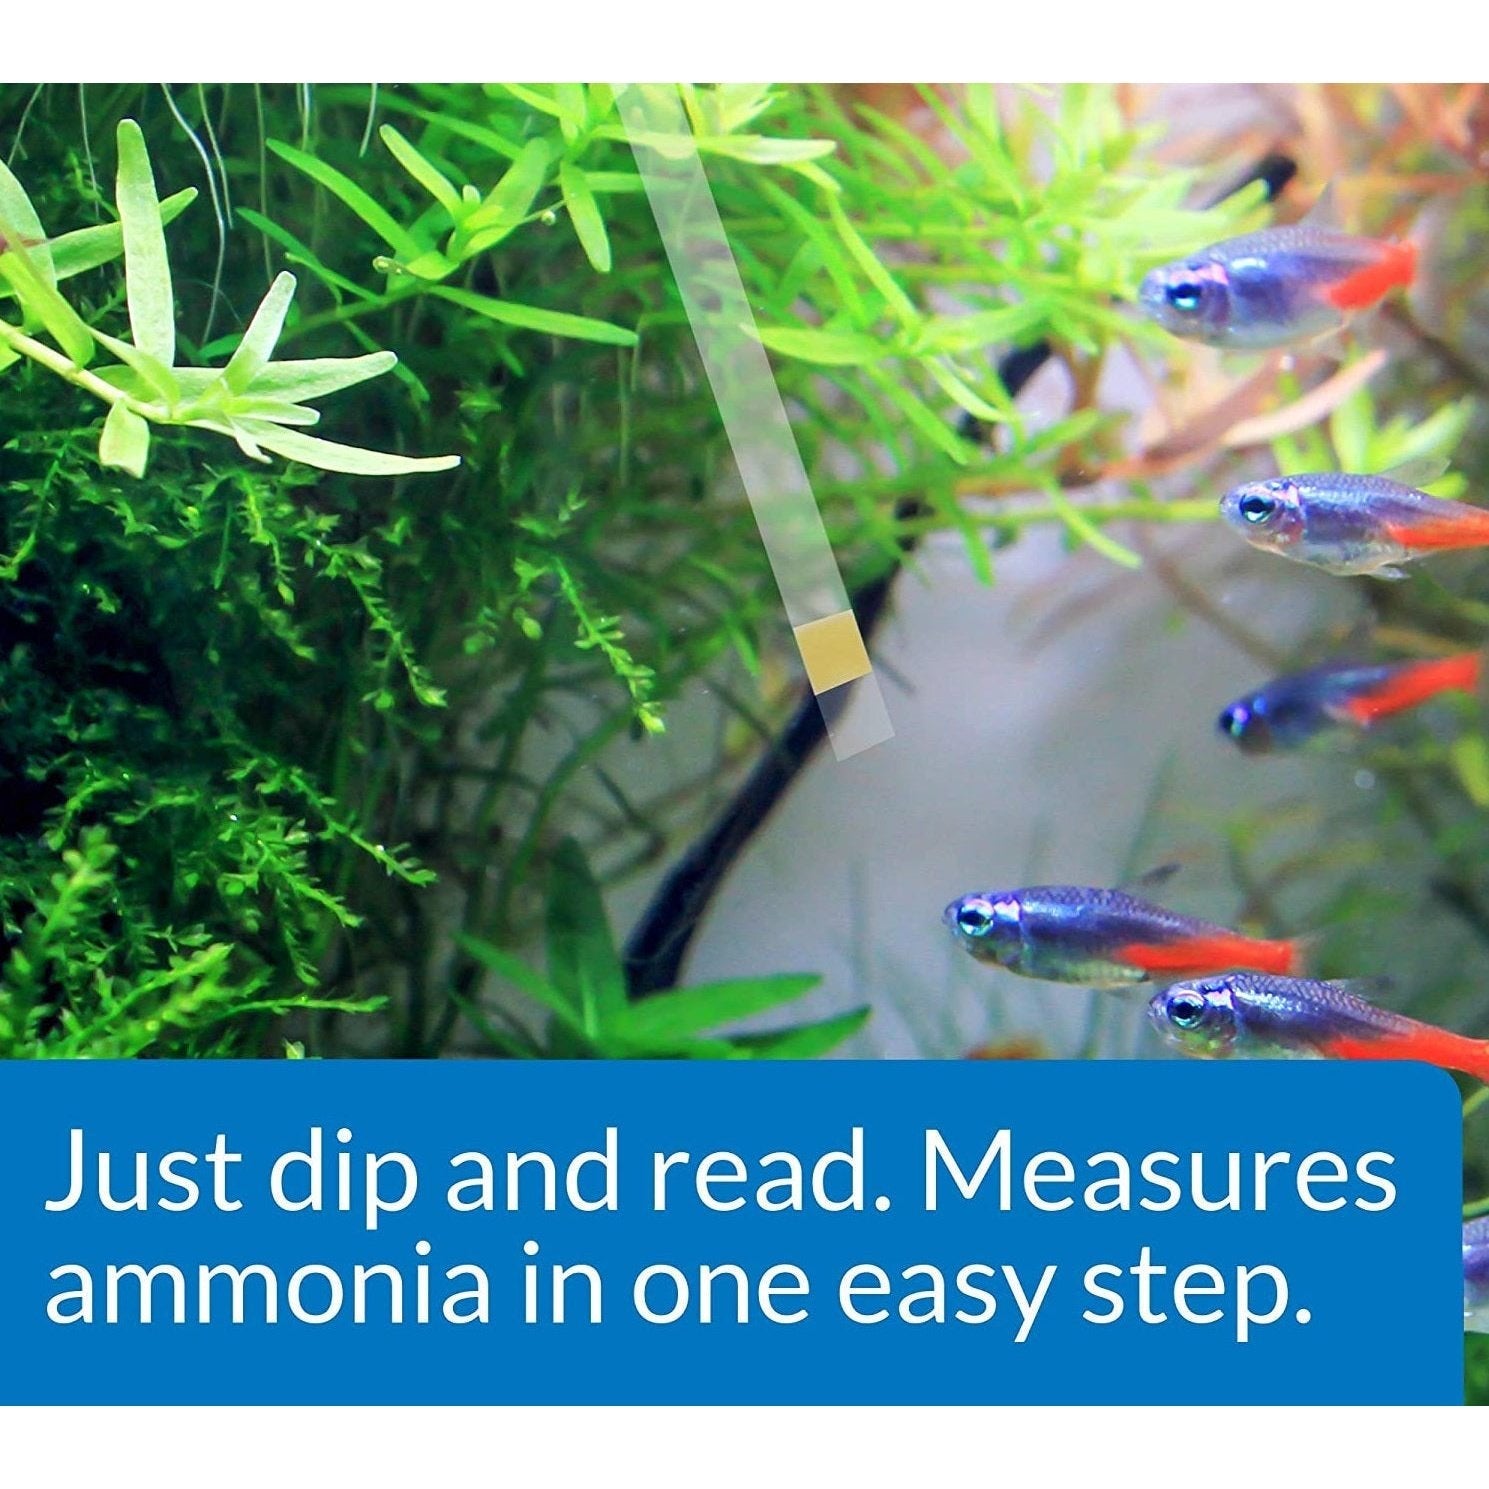 API Ammonia Test Strips NH3 / NH4 for Freshwater and Saltwater Aquariums Aquariums For Beginners